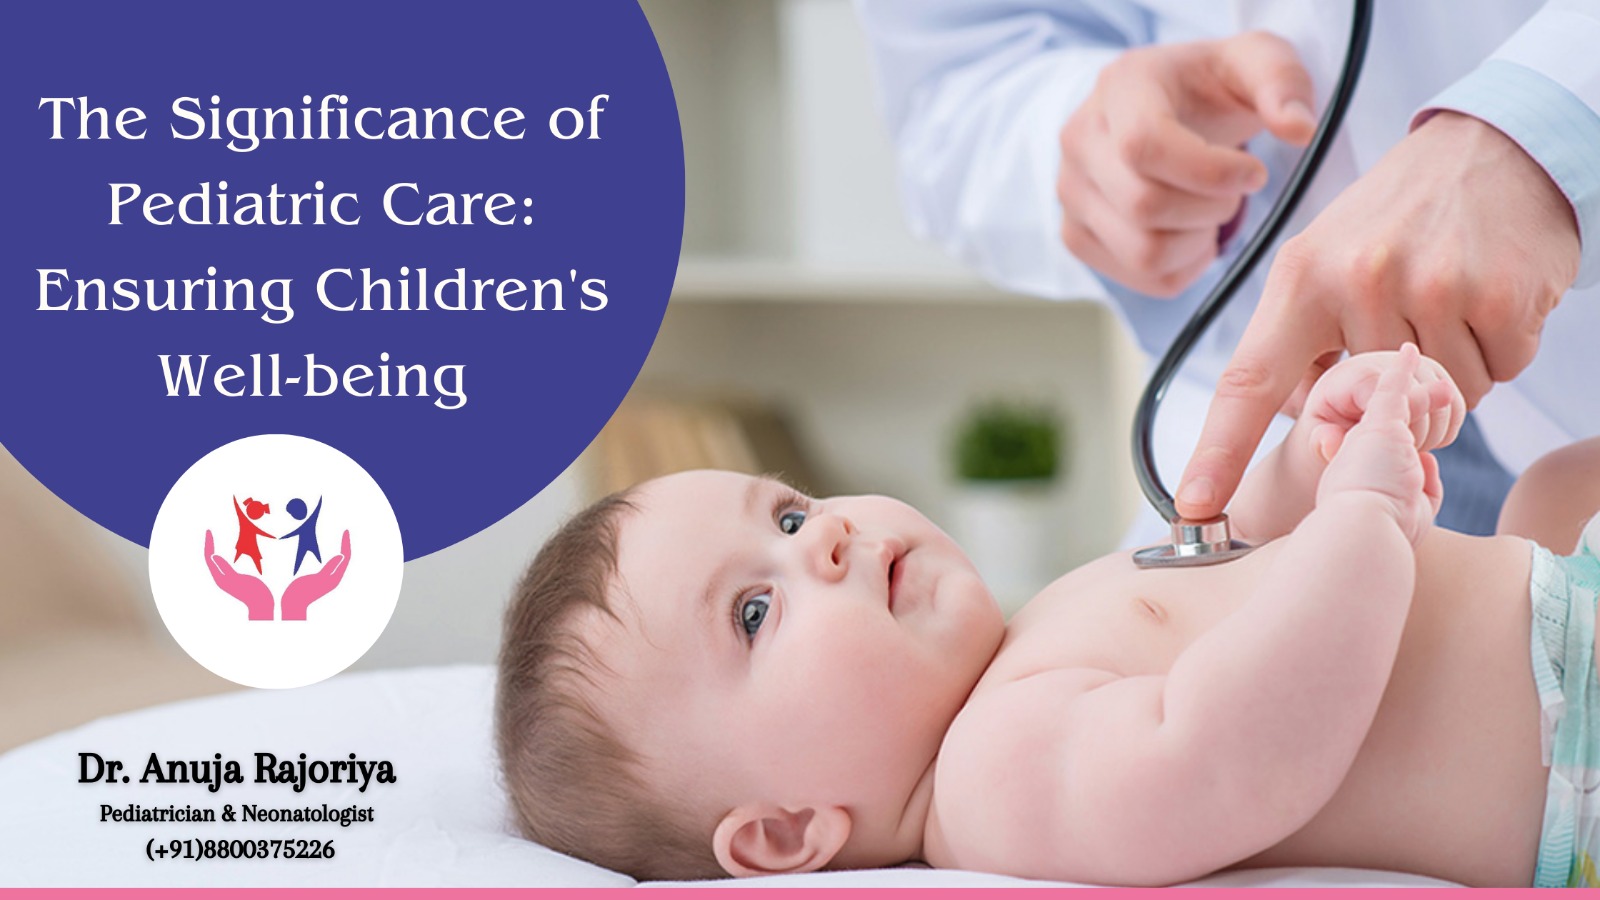 The Significance of Pediatric Care: Ensuring Children’s Well-being